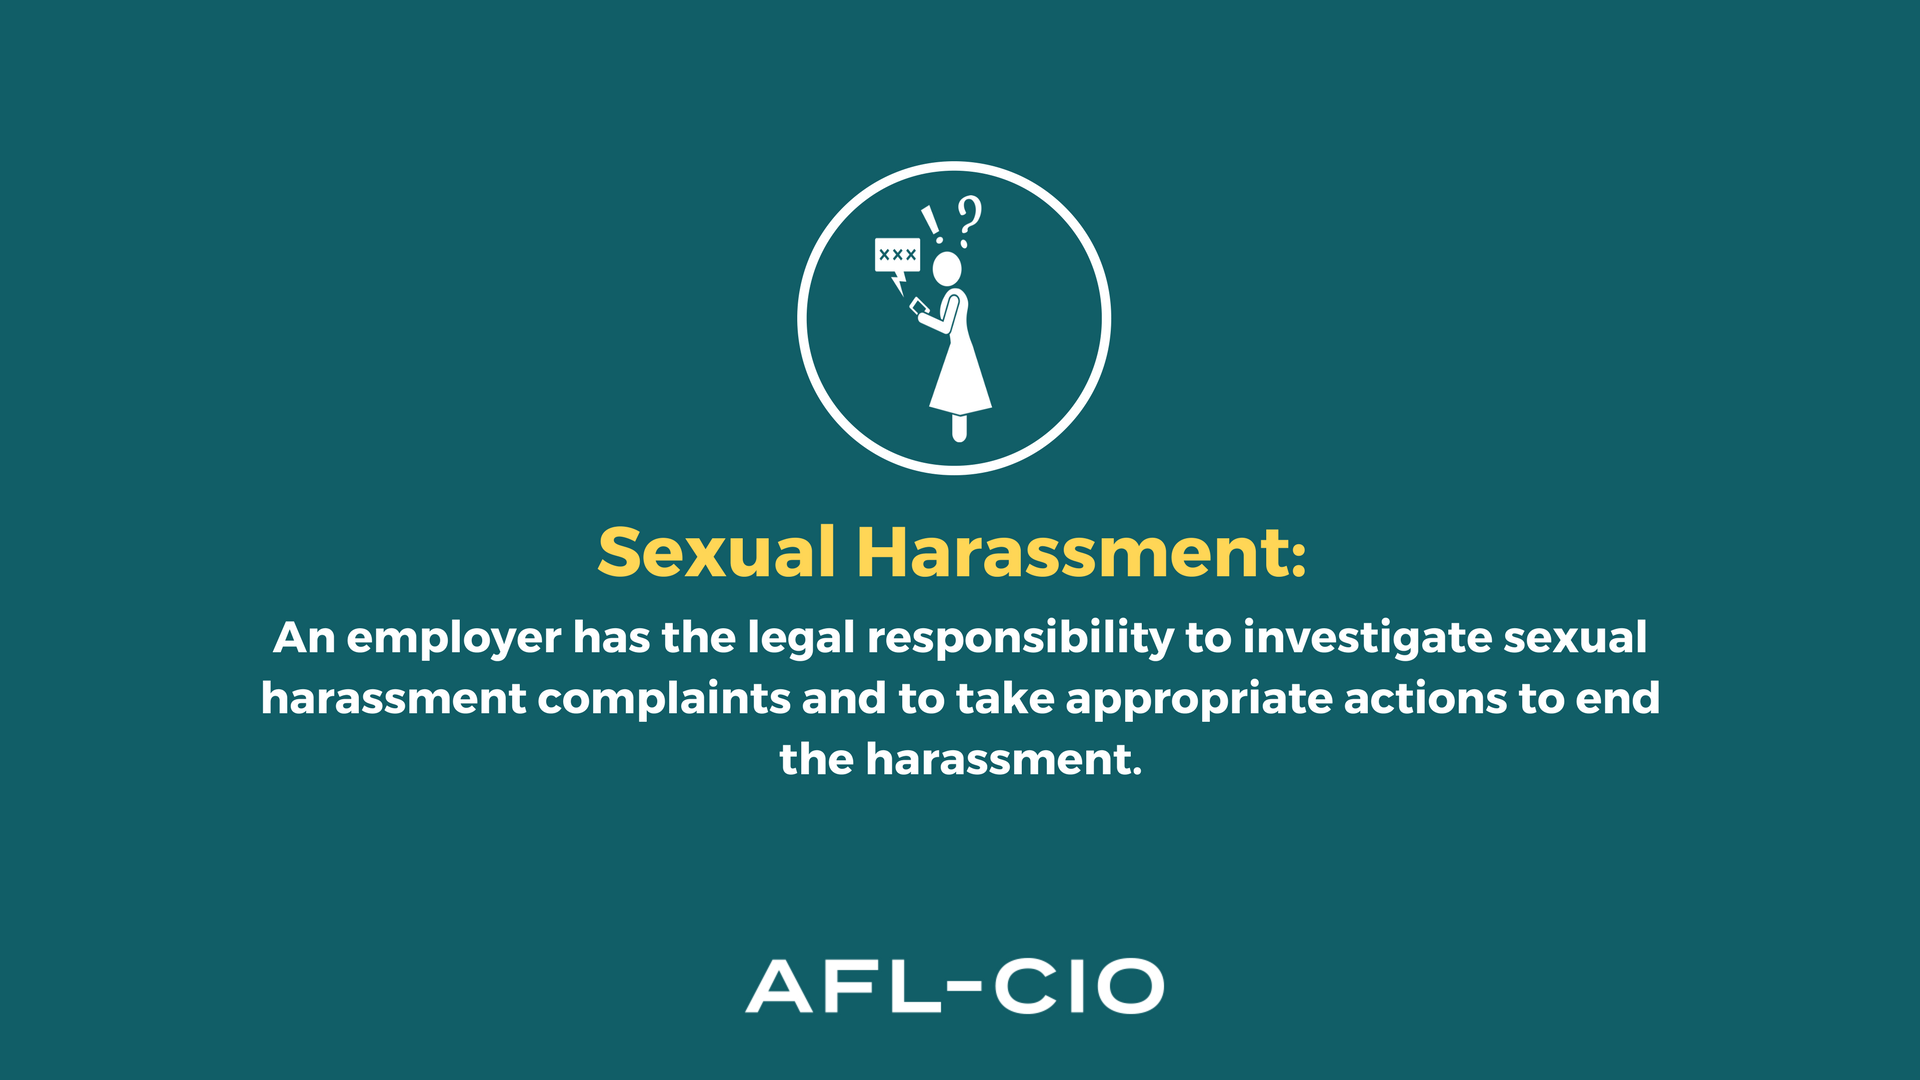 Sexual Harassment: An employer has the legal responsibility to investigate sexual harassment complaints and to take appropriate actions to end the harassment.